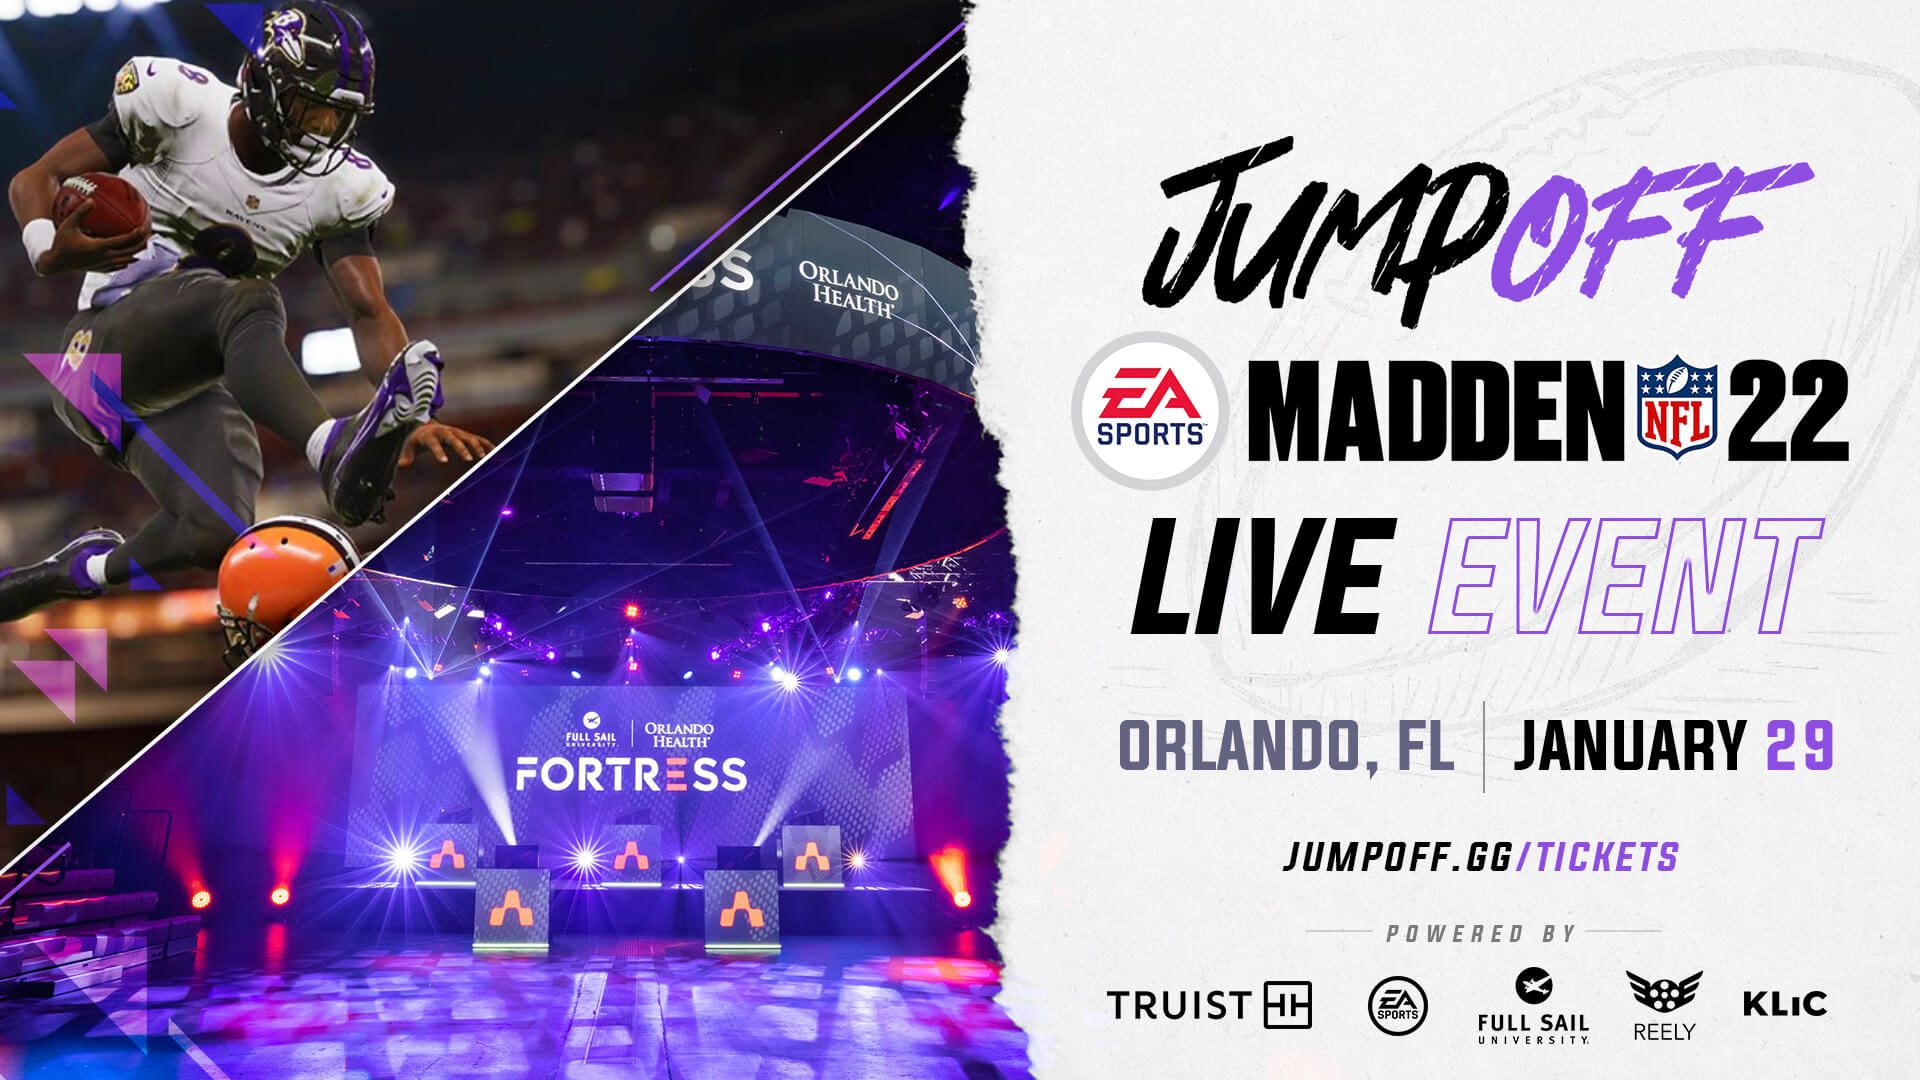 a flyer for the jump off event featuring a football player jumping over another football player and the fortress esports arena